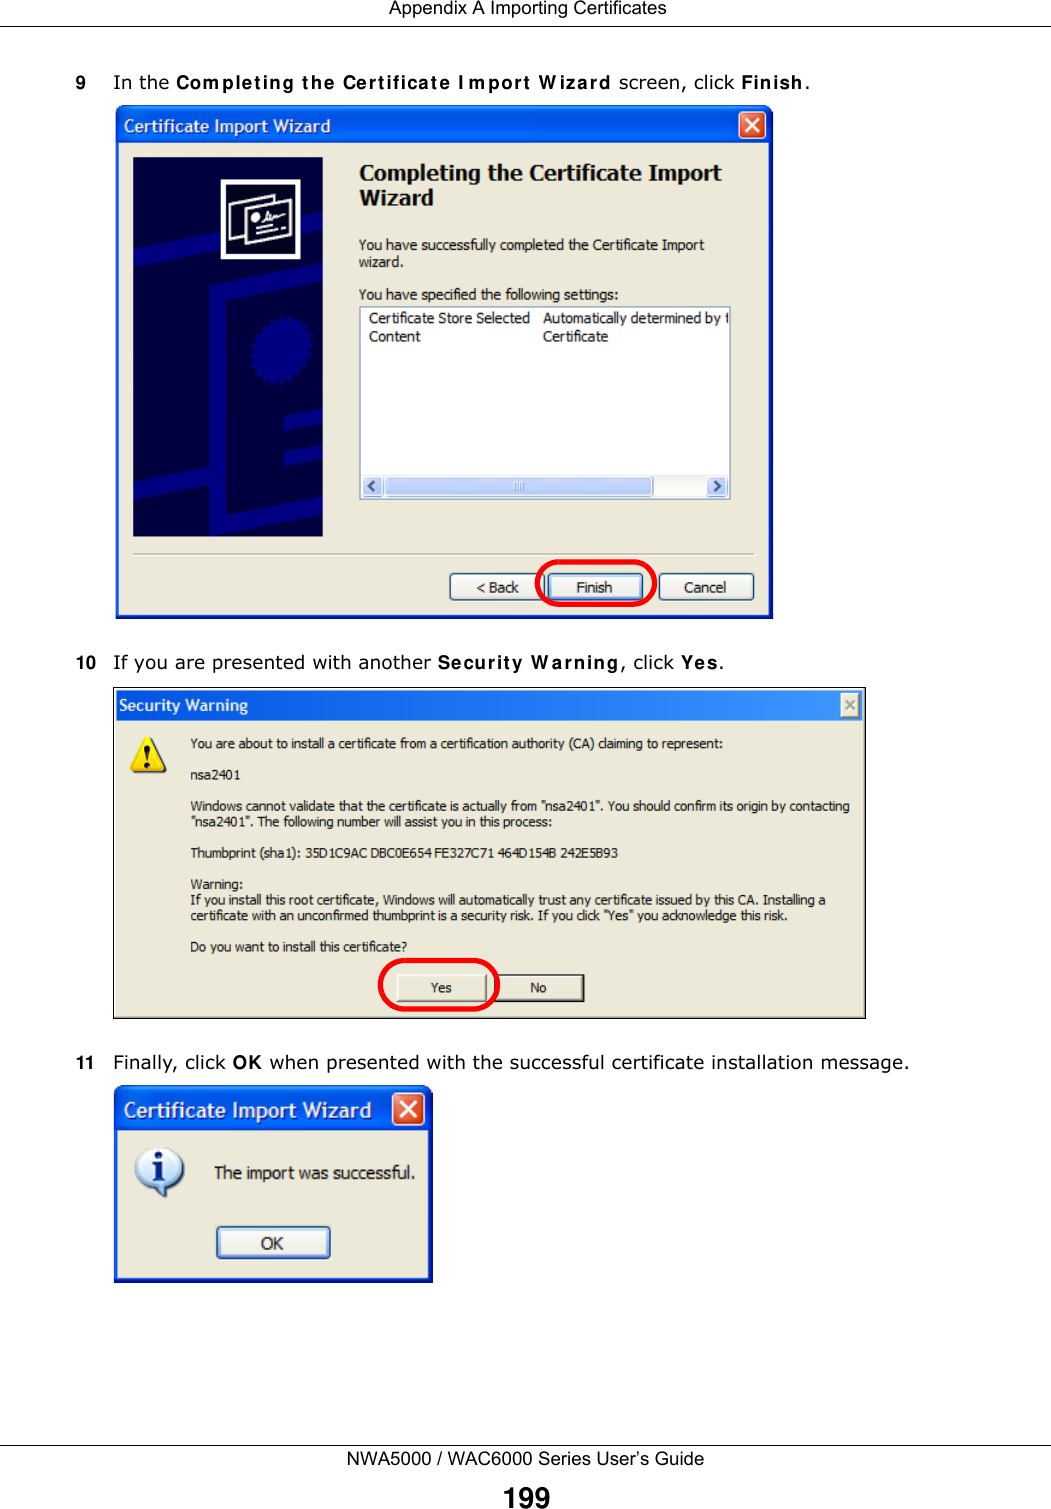  Appendix A Importing CertificatesNWA5000 / WAC6000 Series User’s Guide1999In the Completing the Certificate Import Wizard screen, click Finish.10 If you are presented with another Security Warning, click Yes.11 Finally, click OK when presented with the successful certificate installation message.